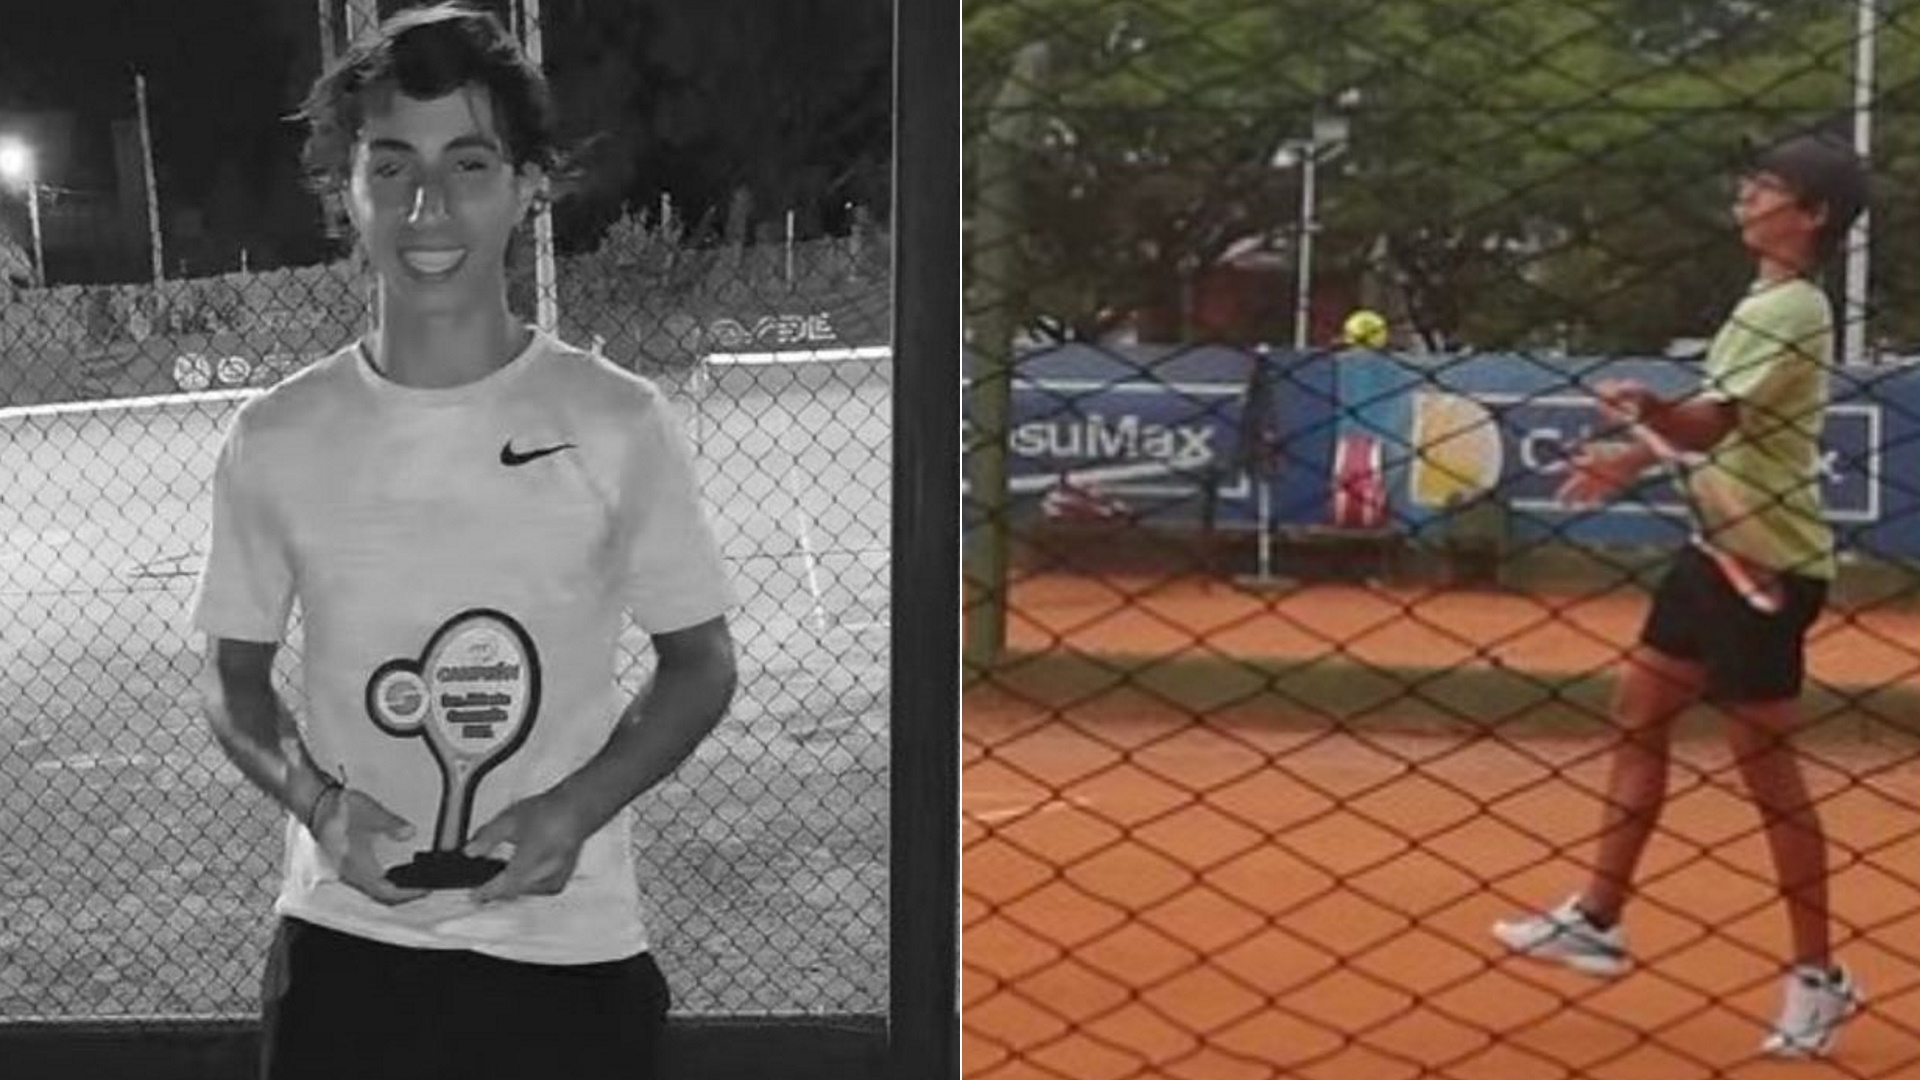 Tiago Alomar, a promising young tennis player, died at the age of 17 as a result of a traffic accident in his native Gualeguay (Photo: @AATenis and @tiago_alomar)